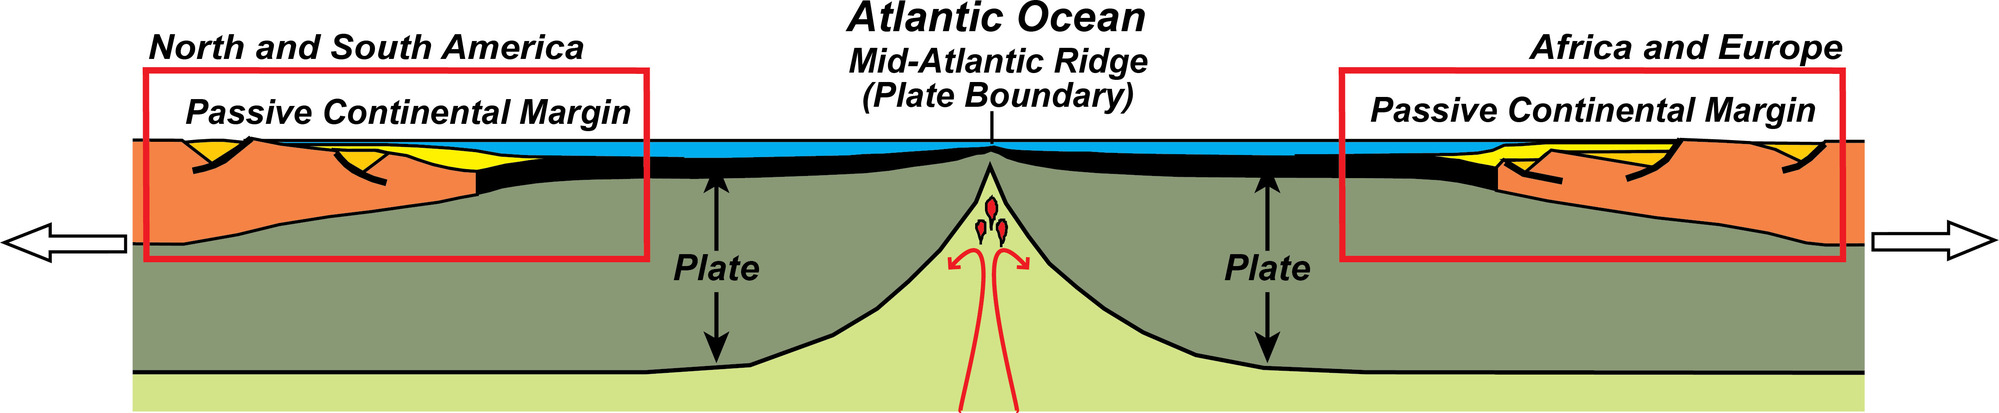 illustration of the upper layers of the earth showing an ocean basin with mid-ocean ridge